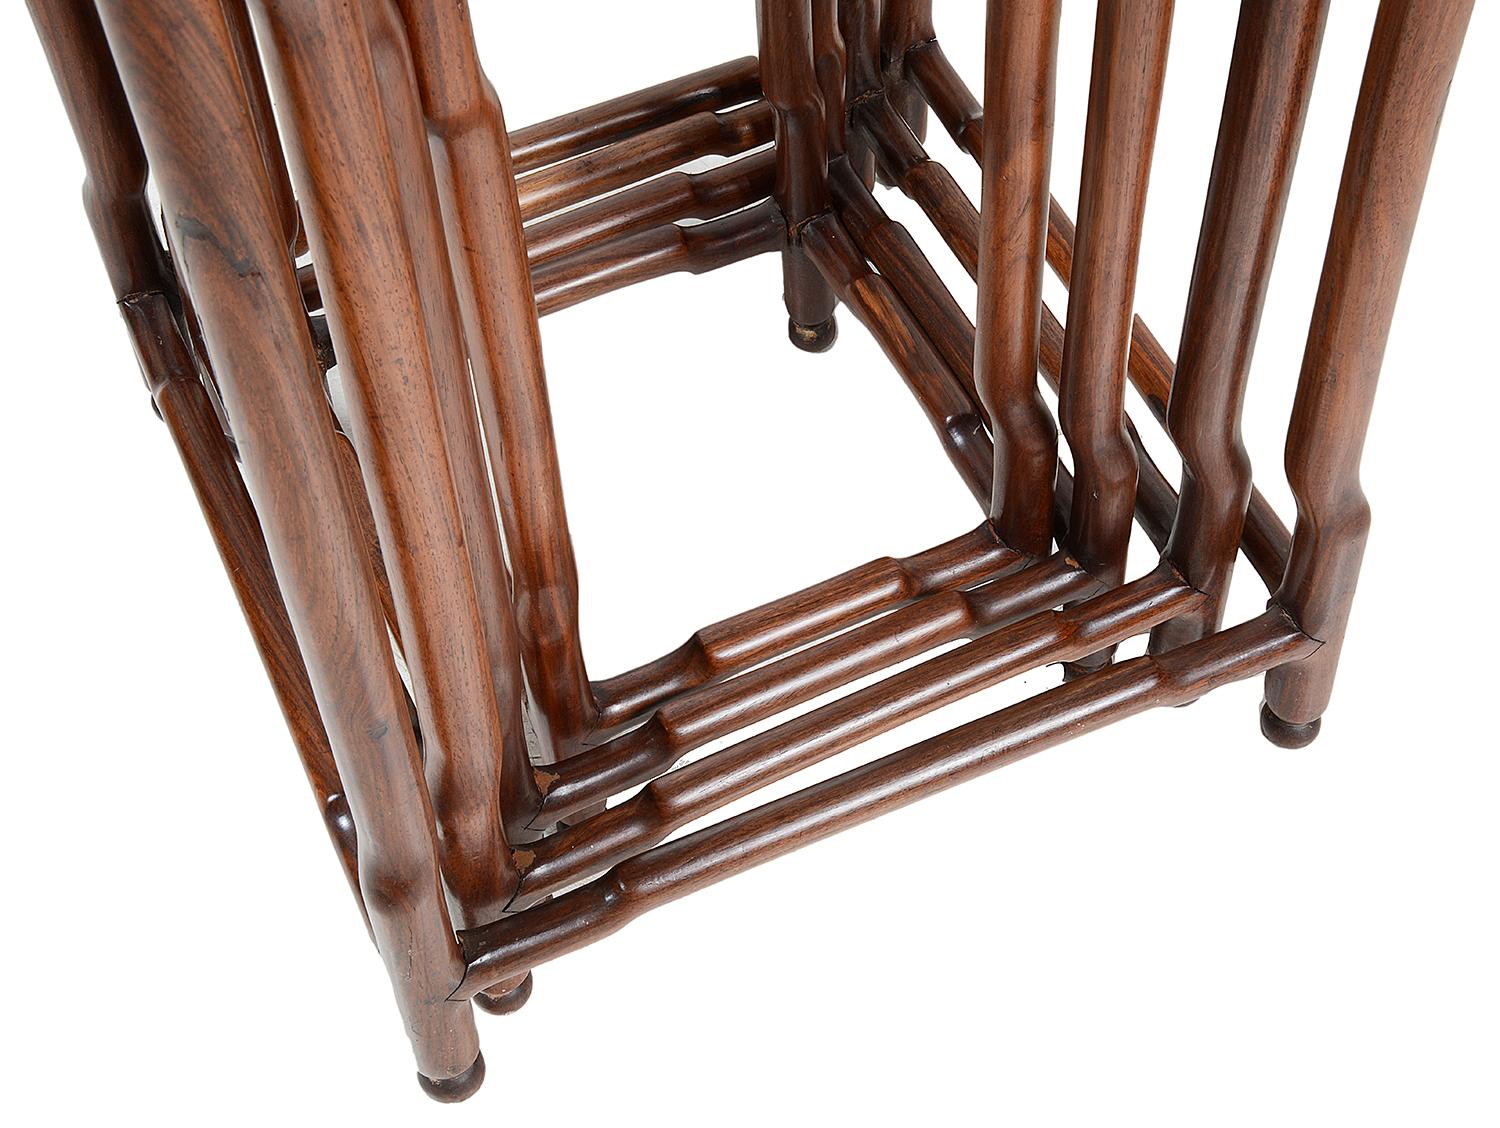 Nest of Four Chinese Hardwood Tables, Late 19th Century For Sale 3